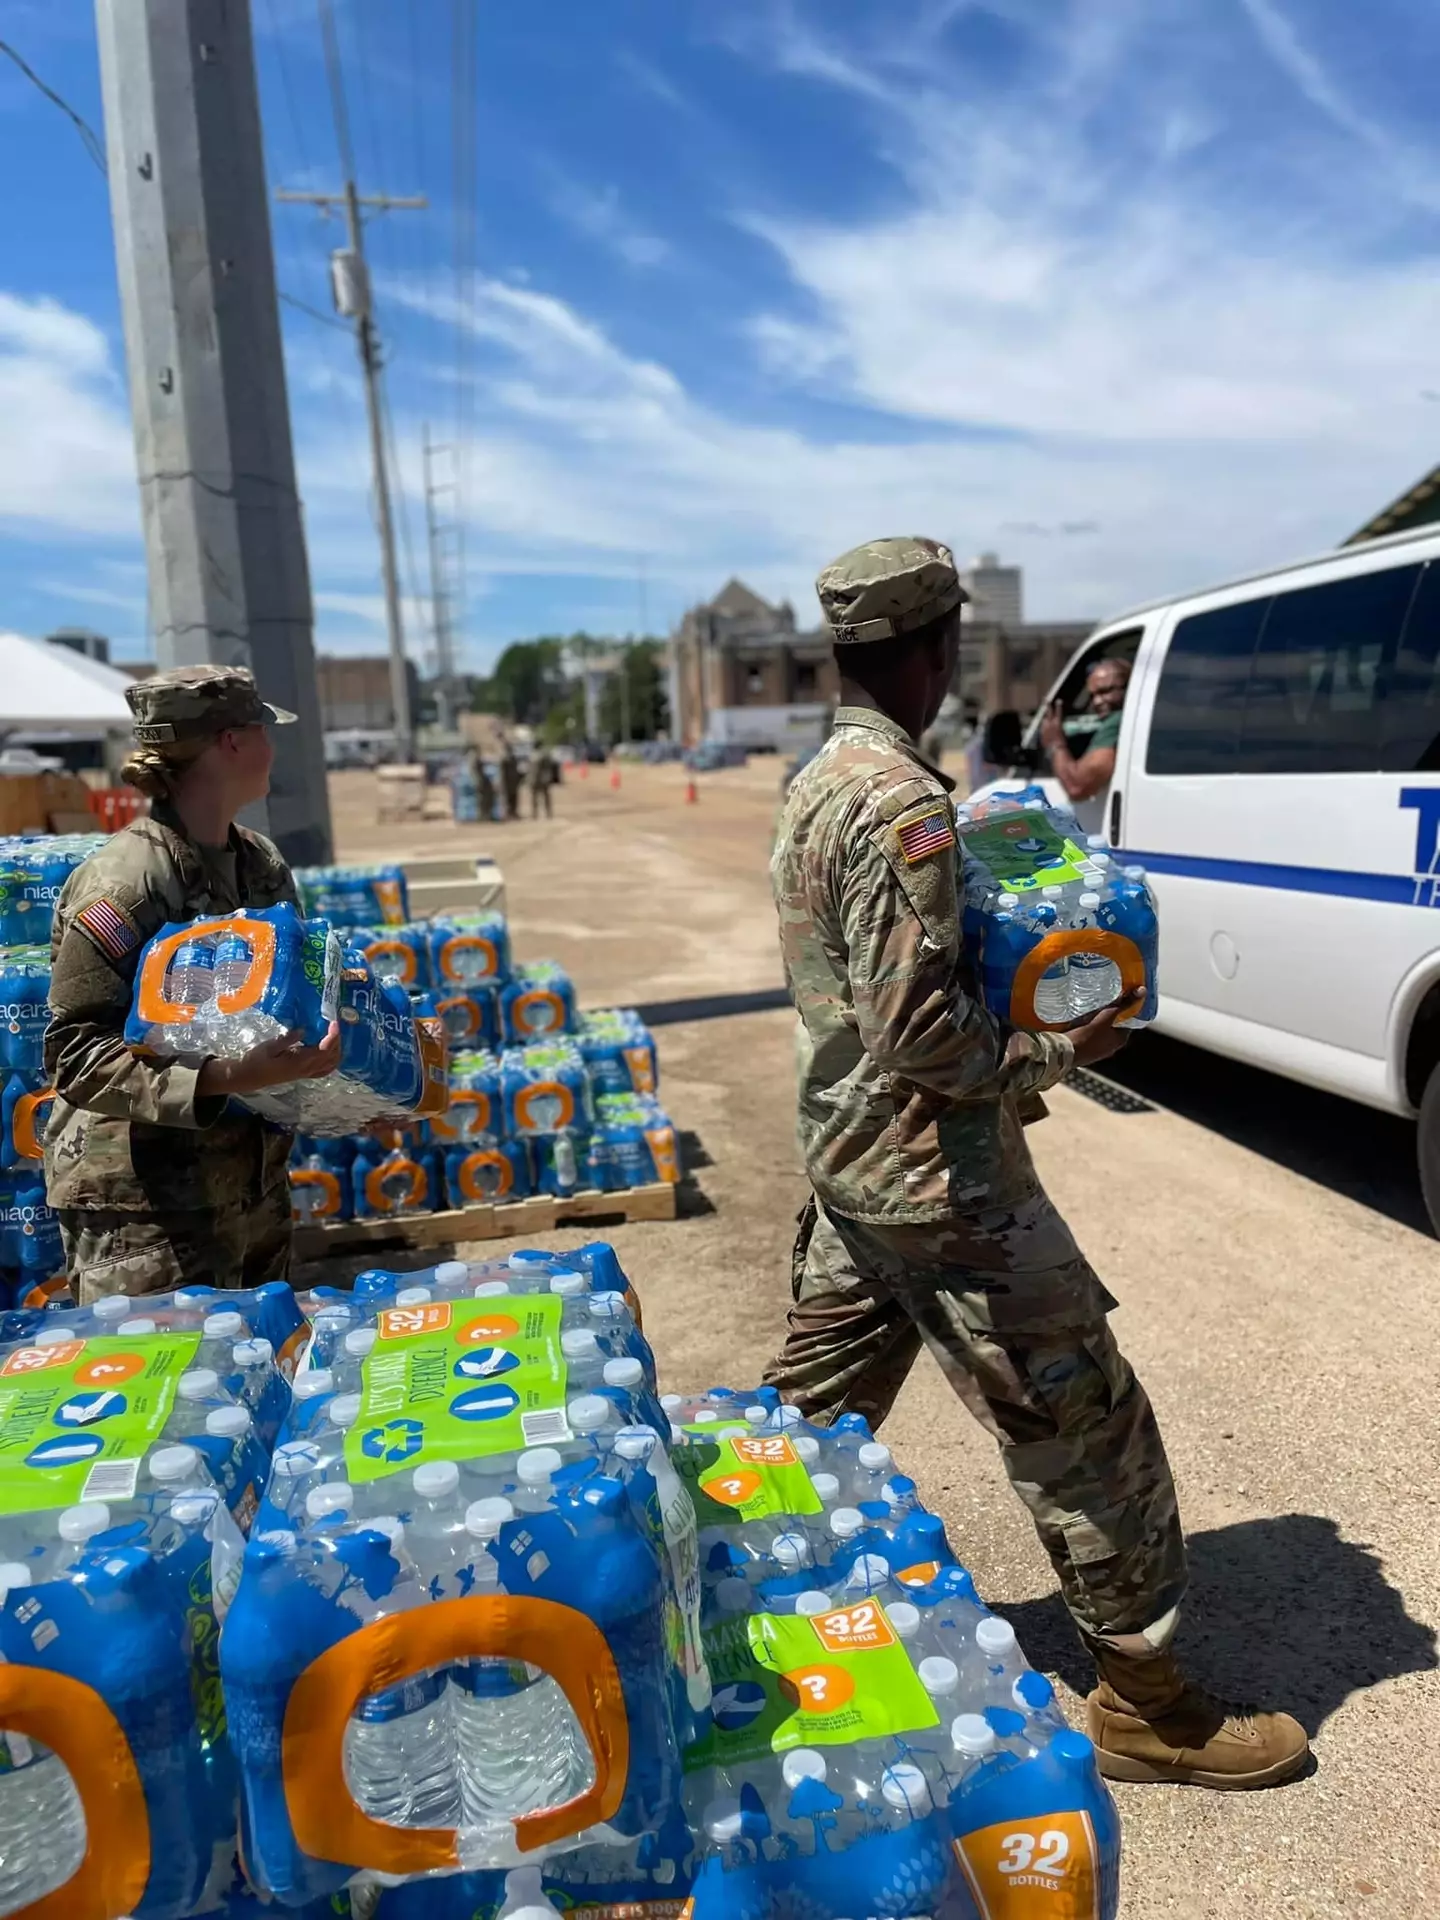 The US national guard has been deployed to Jackson to hand out supplies of bottled water to people.